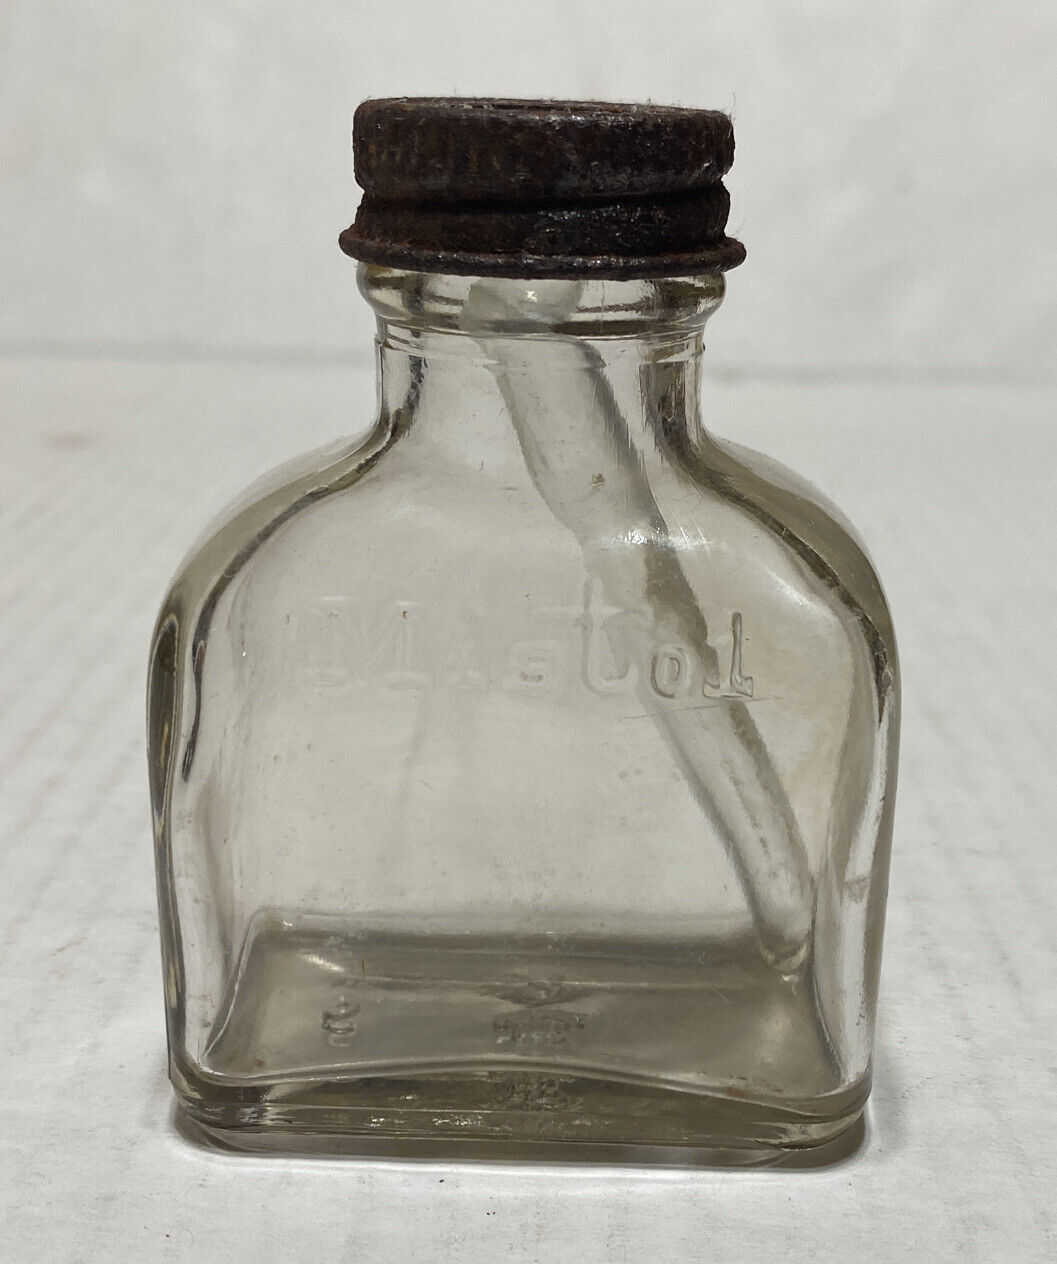 1940s Vintage Mistol Medicine Bottle With Cap And Dropper Stanco Incorporated